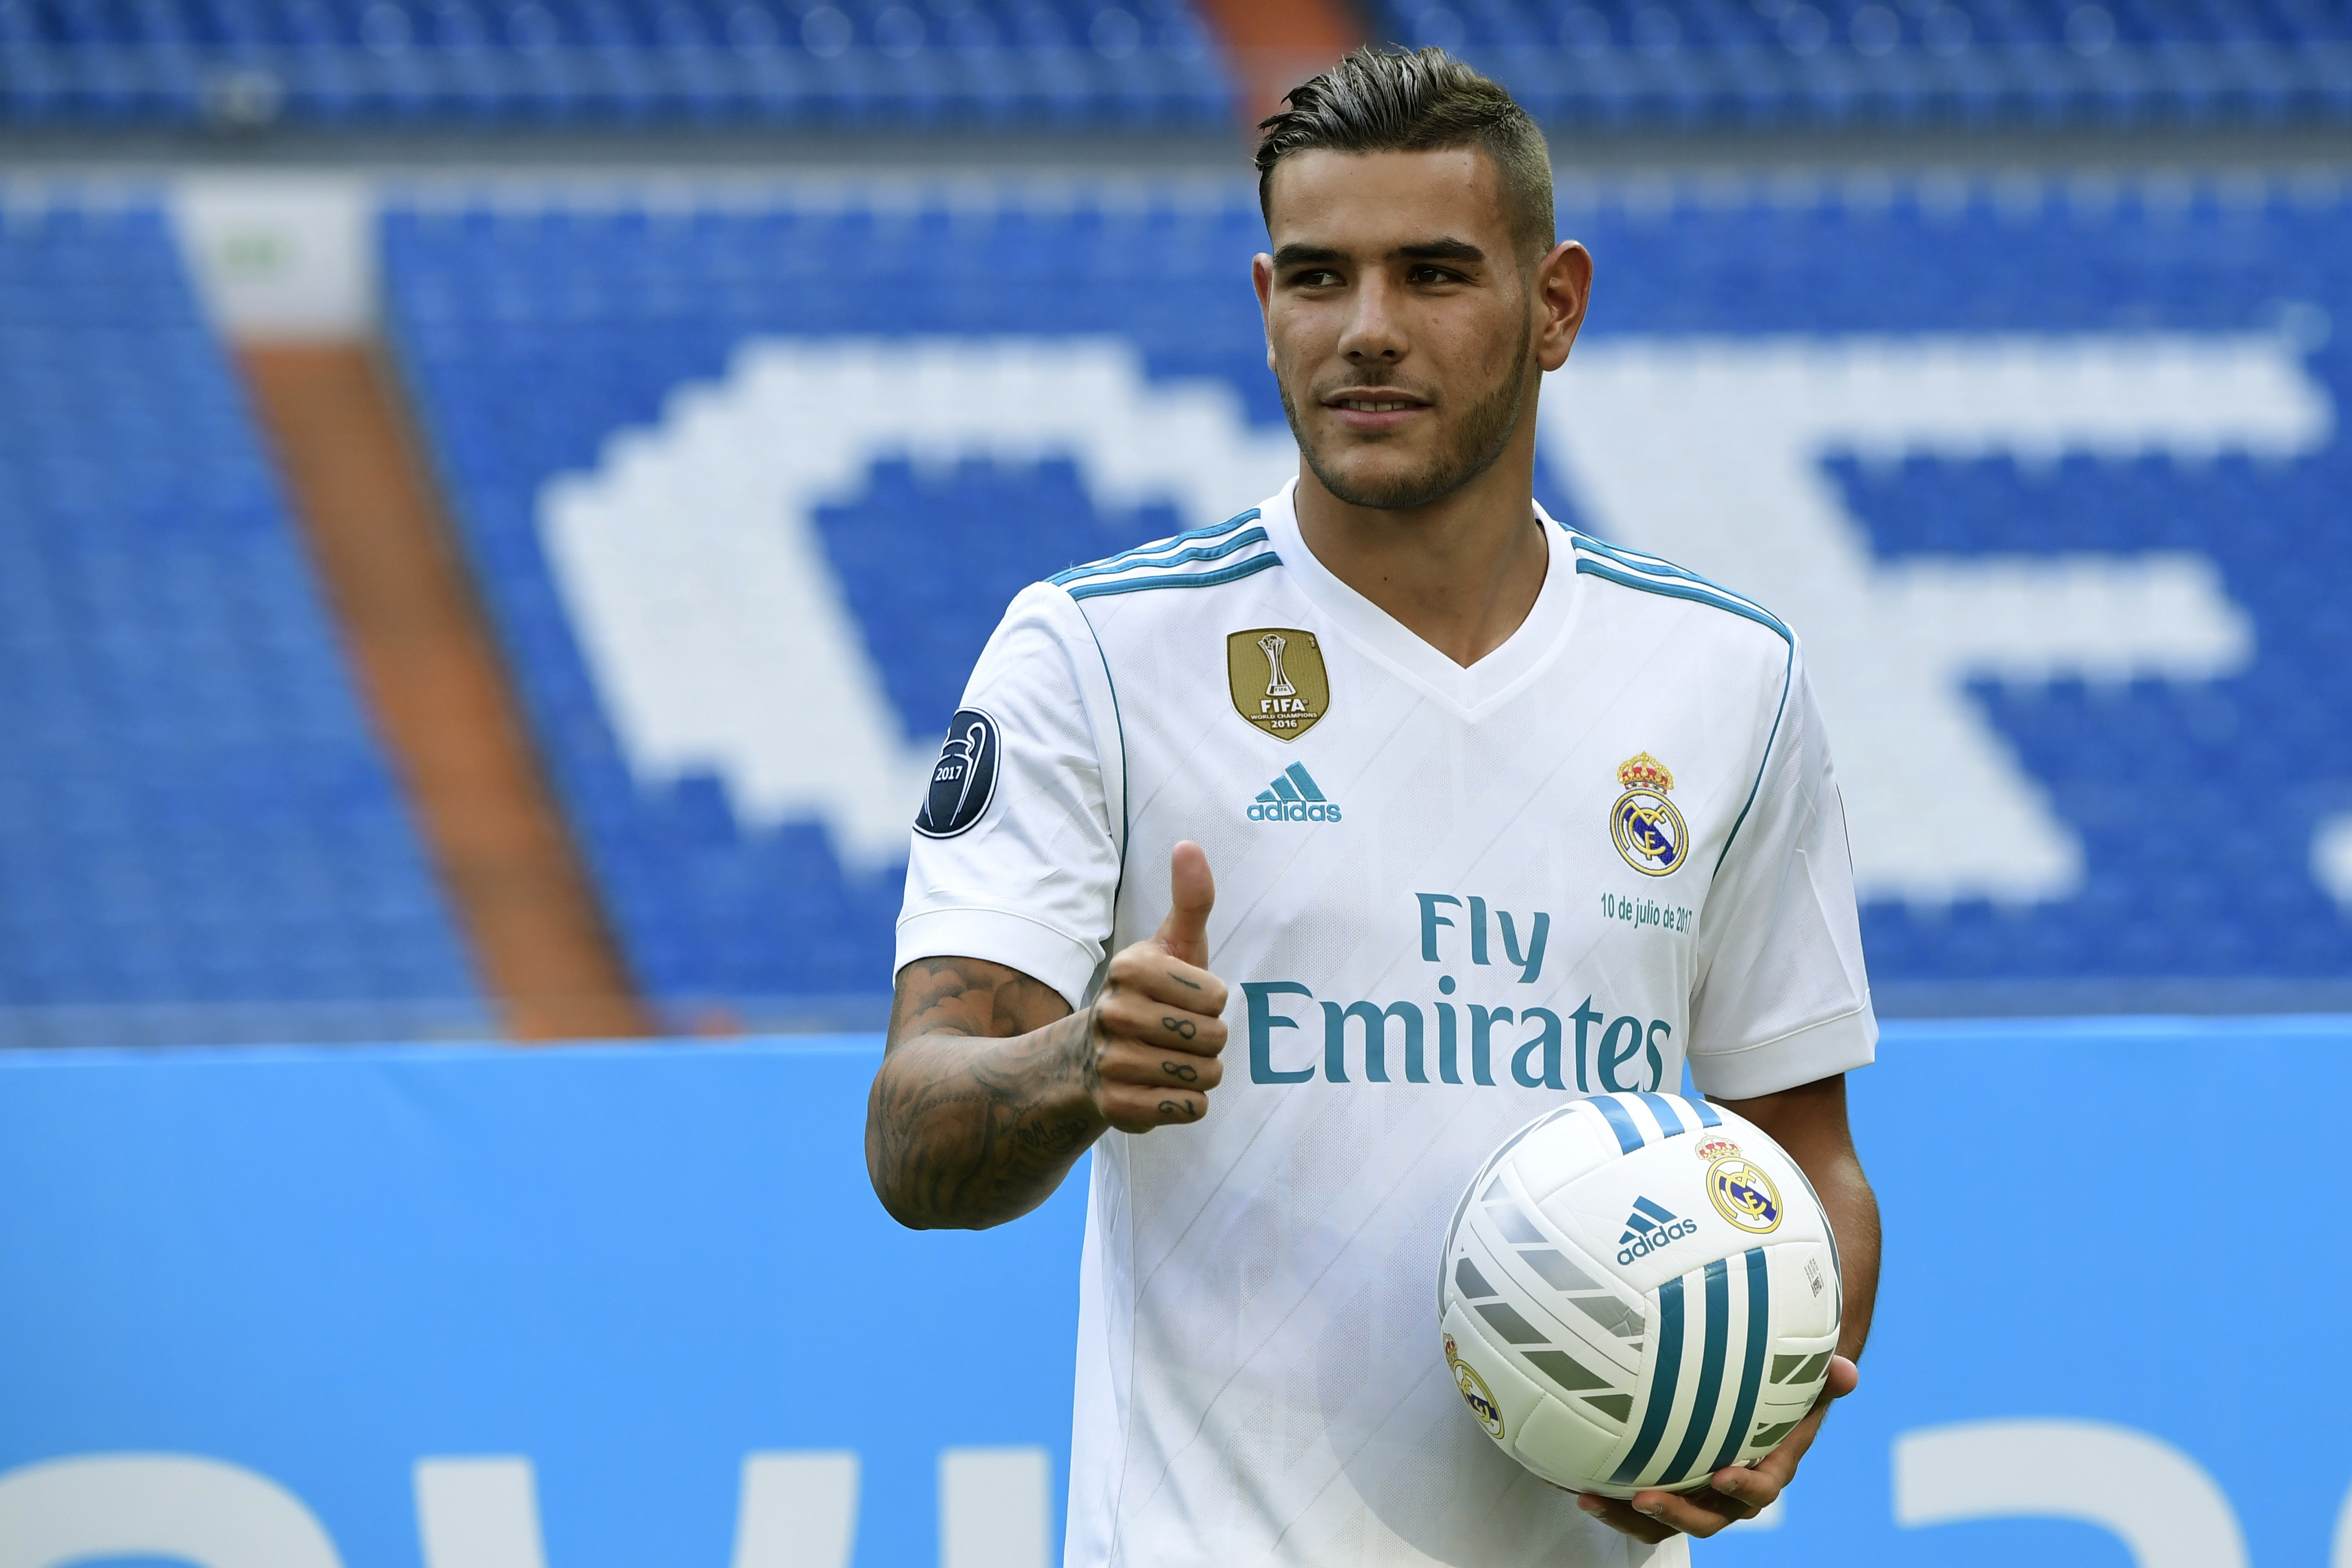 Real Madrid's French new player Theo Hernandez poses during his presentation at the Santiago Bernabeu stadium in Madrid, on July 10, 2017. / AFP PHOTO / JAVIER SORIANO        (Photo credit should read JAVIER SORIANO/AFP/Getty Images)